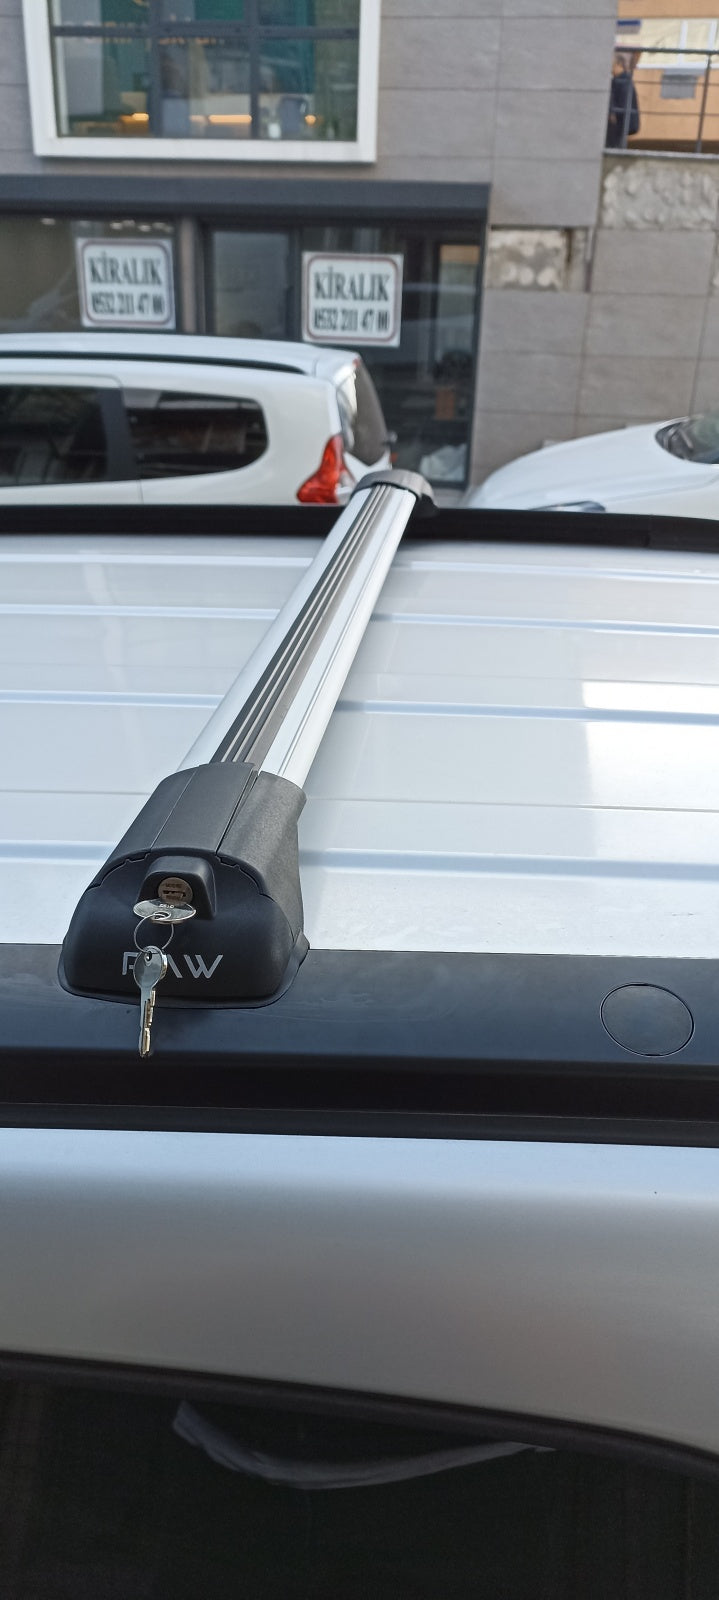 For Mitsubishi Pajero 2007-Up Roof Rack System Carrier Cross Bars Aluminum Lockable High Quality of Metal Bracket Silver-5